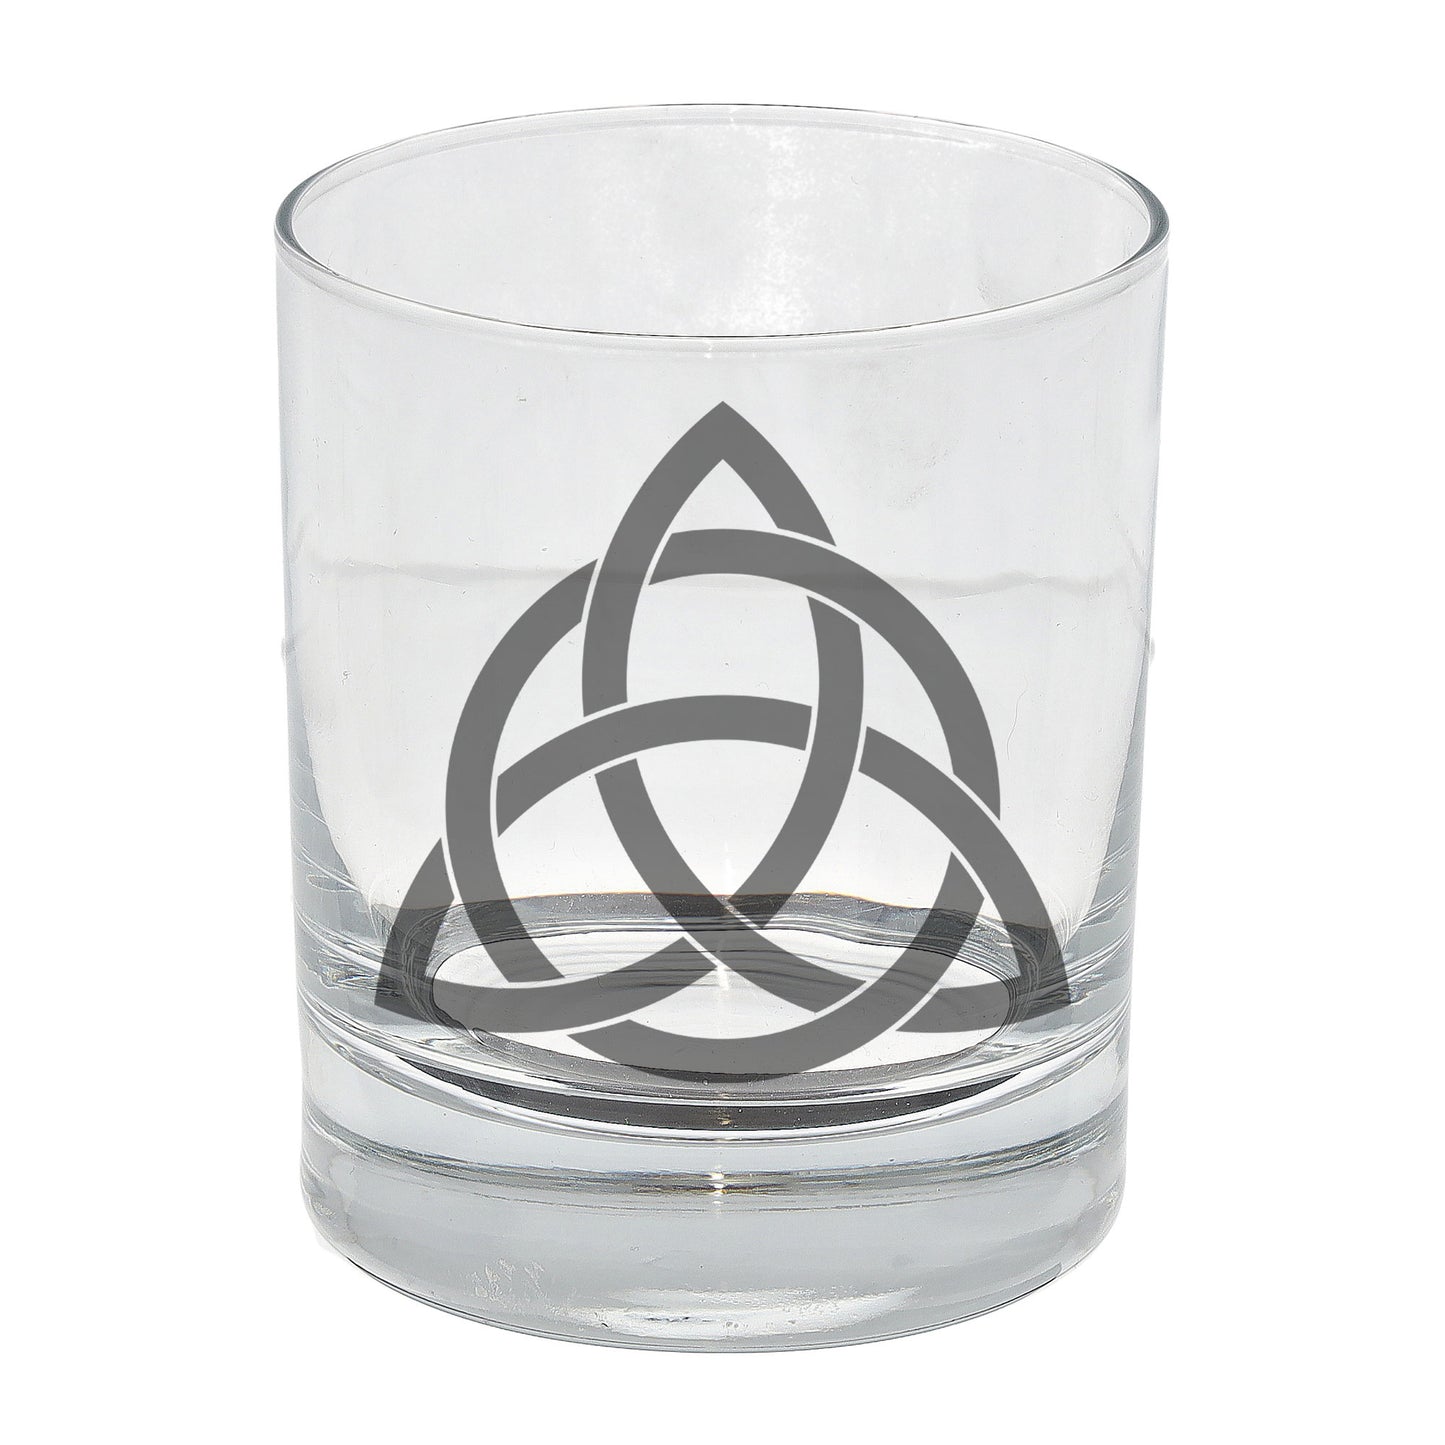 Celtic Knot Engraved Whisky Glass and/or Coaster Set  - Always Looking Good - Whisky Glass Only  